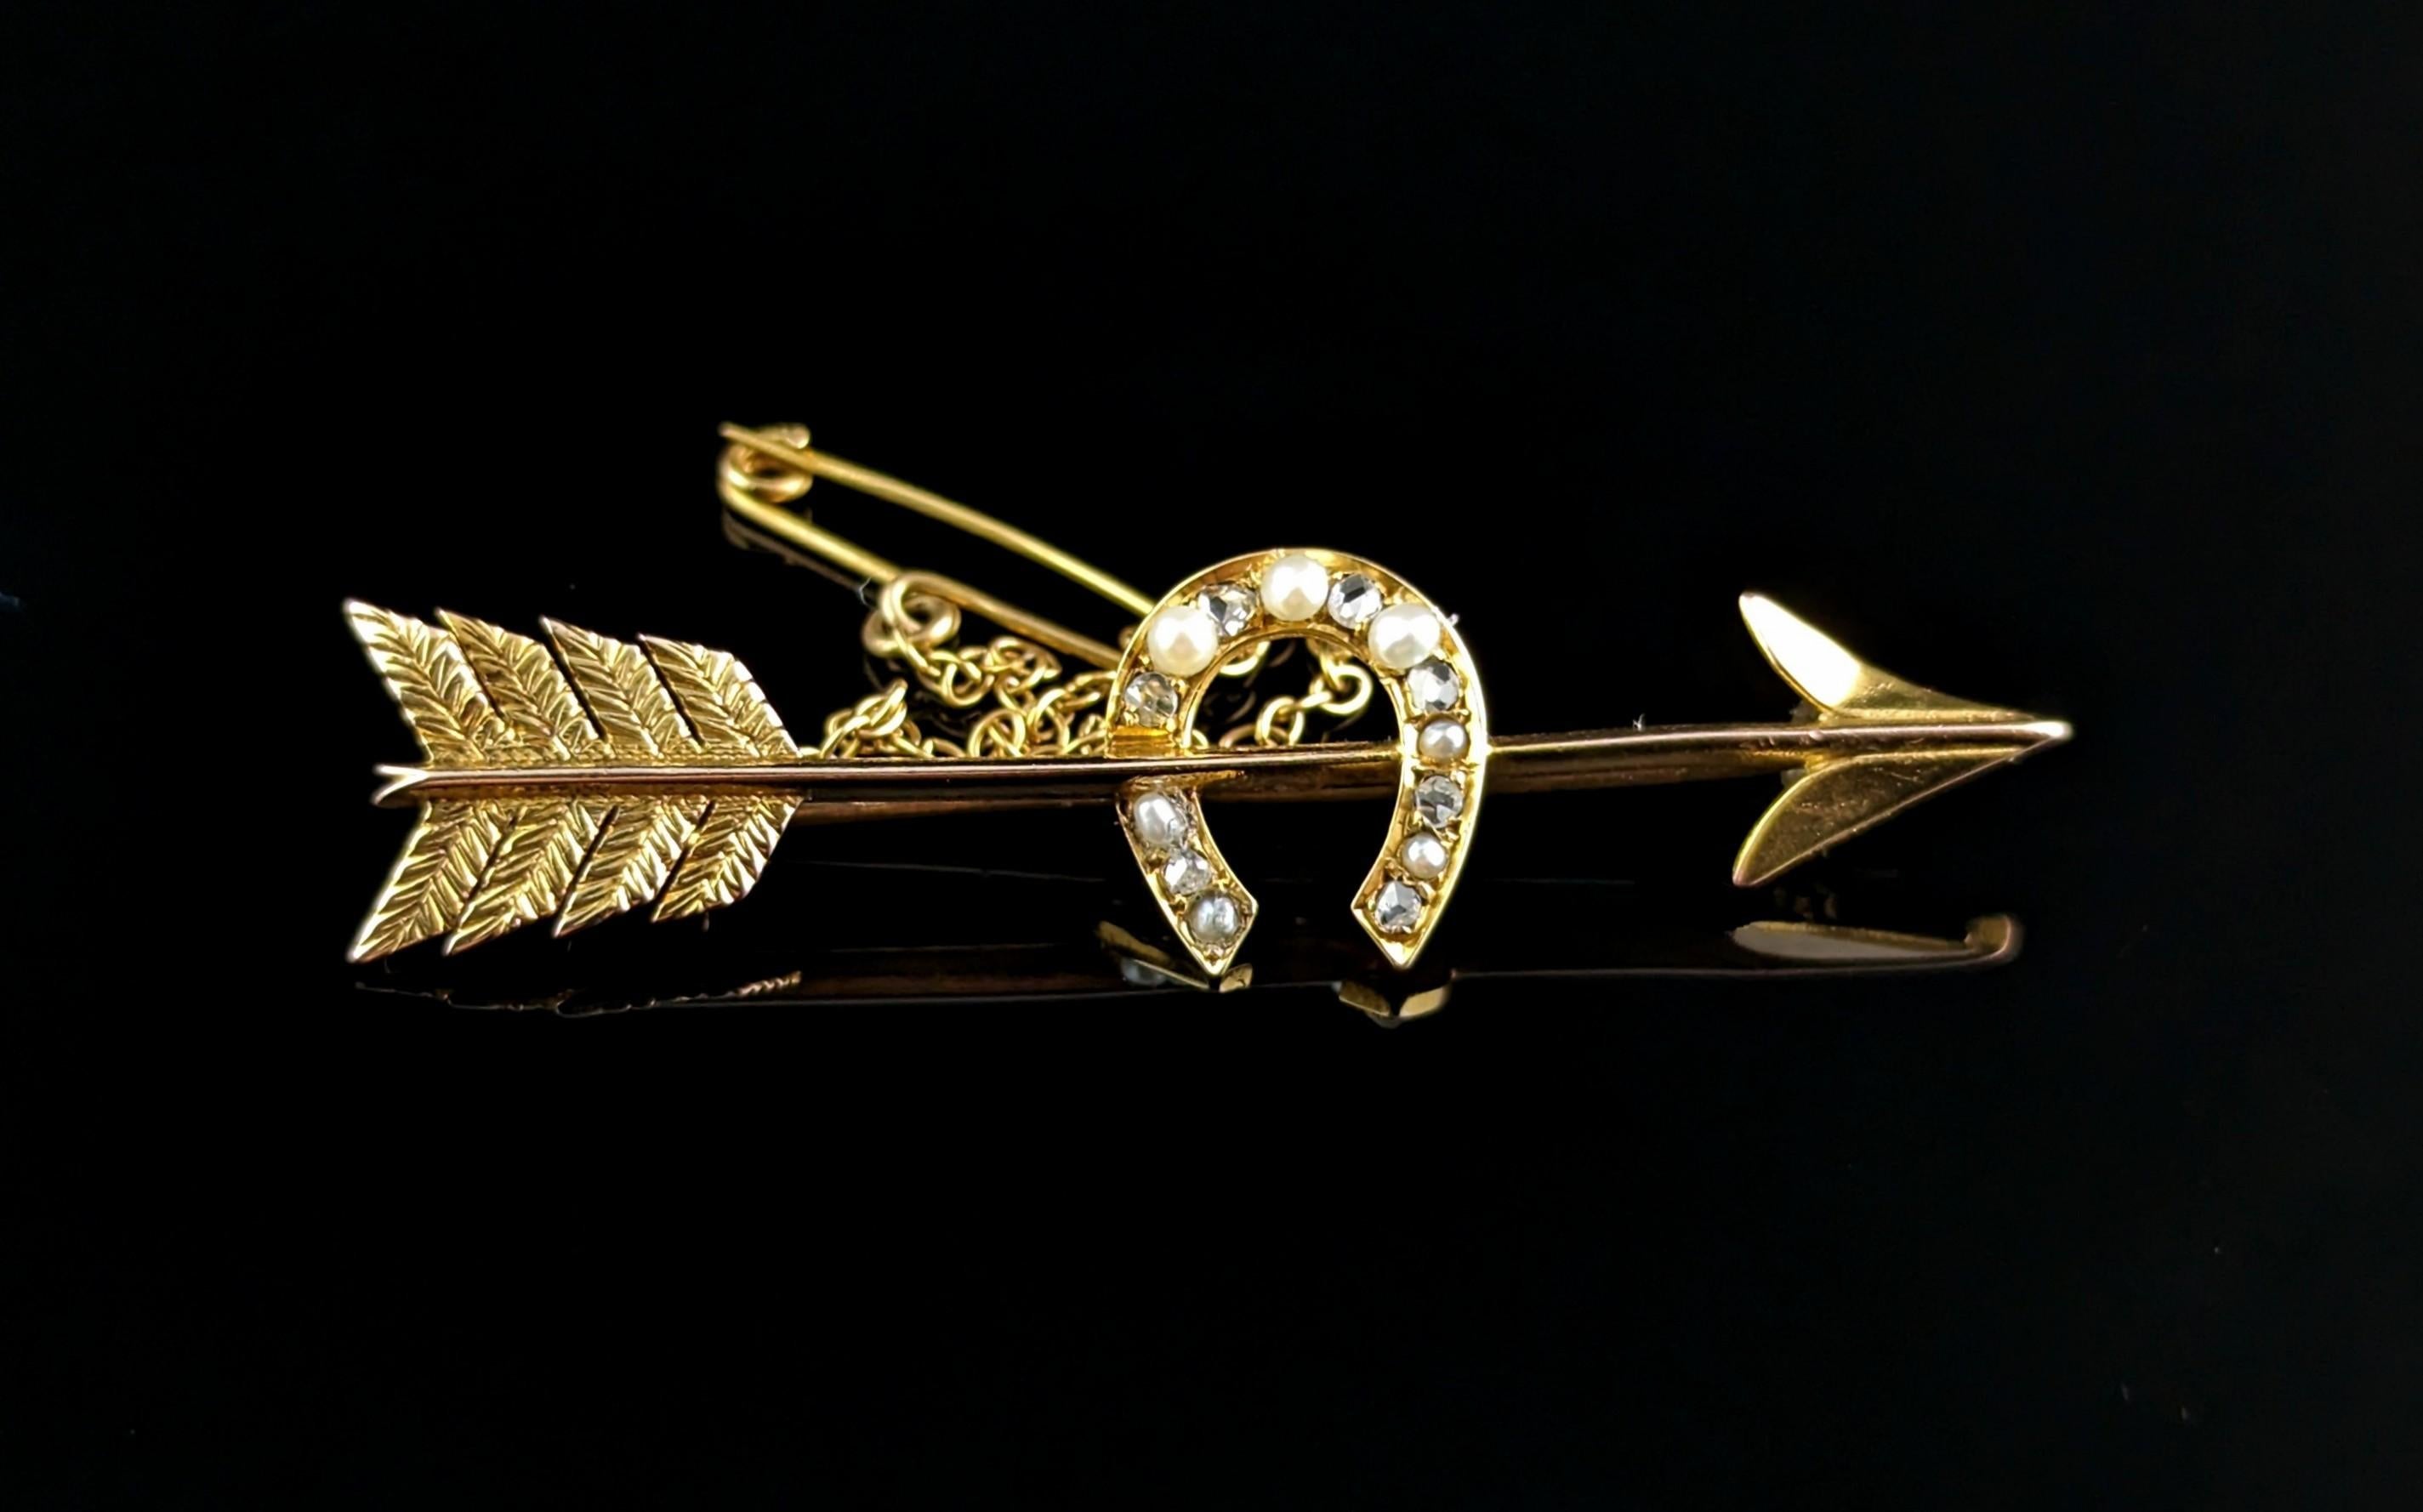 This beautiful antique 15kt gold Arrow and horseshoe brooch is a real charmer! Rich in both symbolism and style you can't go wrong.

A slender feathered arrow with the rich buttery gold hue only found on antique gold, it has a slightly brushed